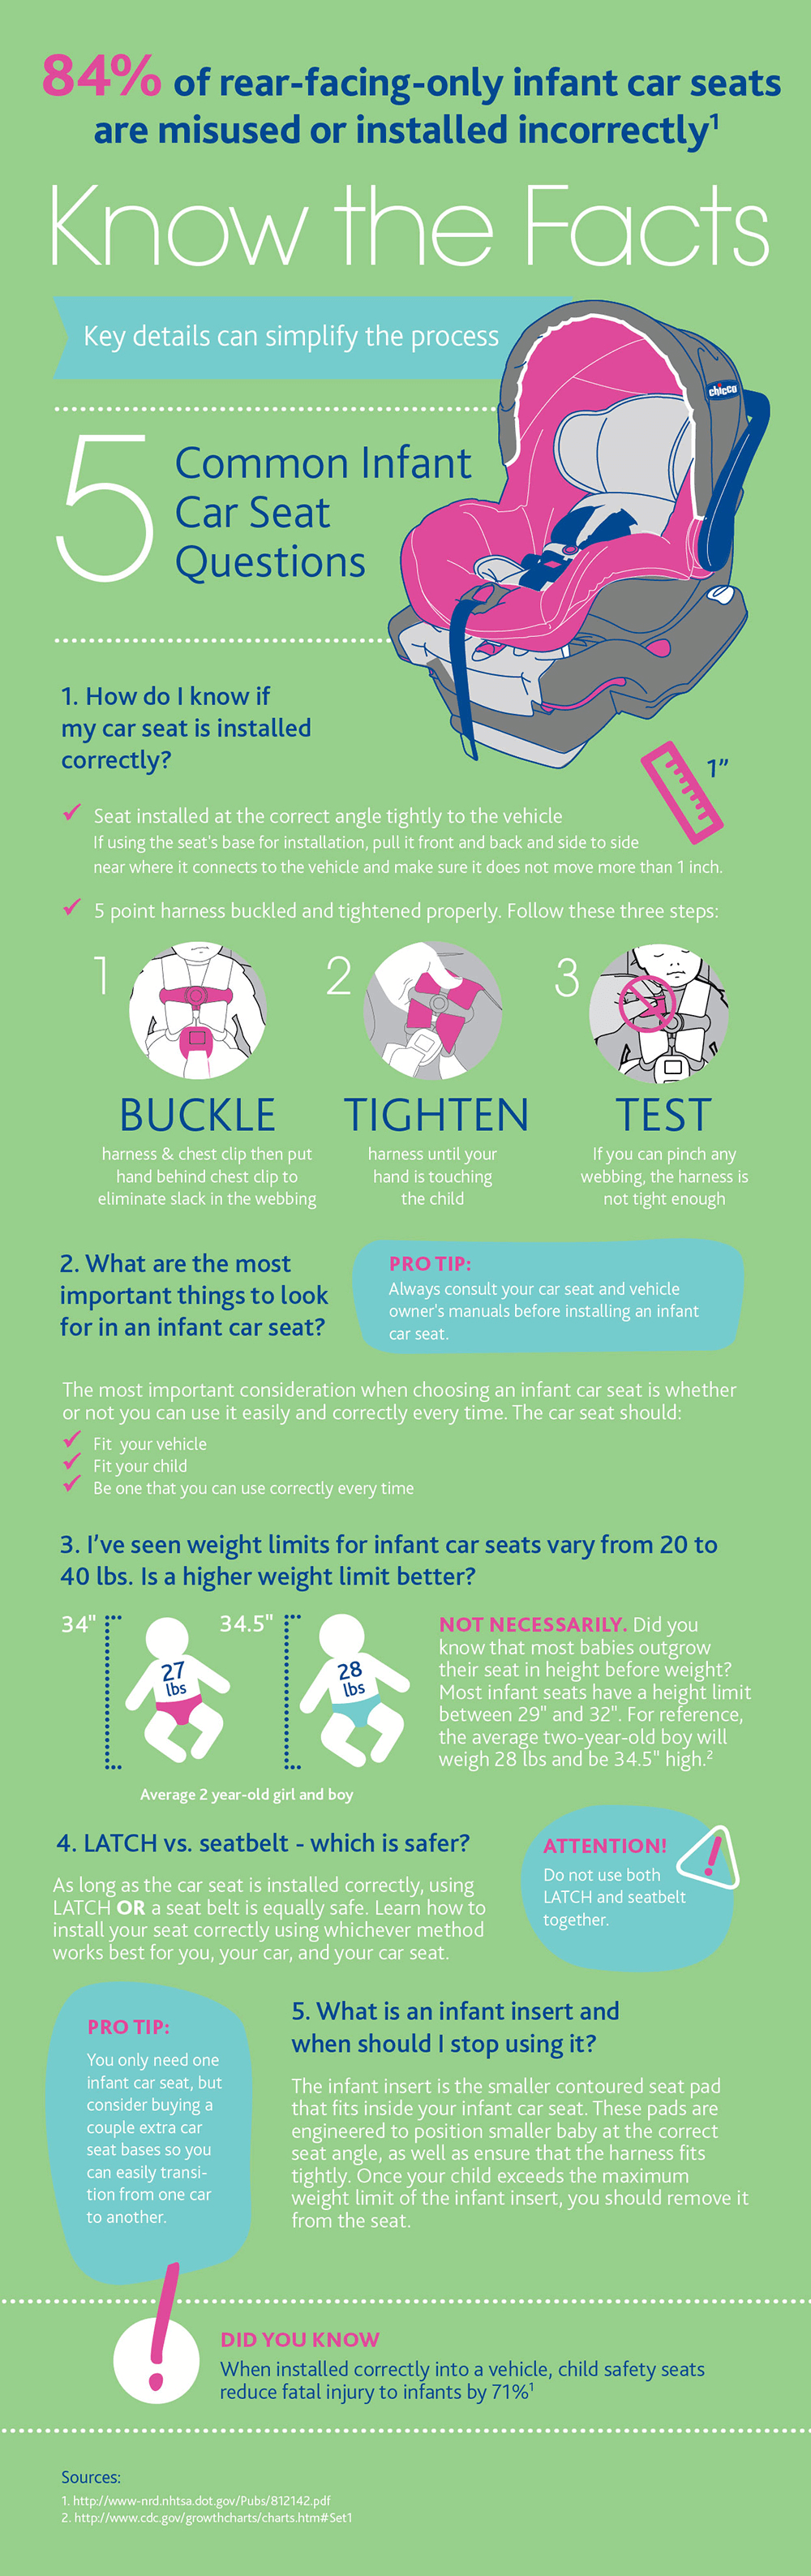 Infographic on Infant Car Seat Safety